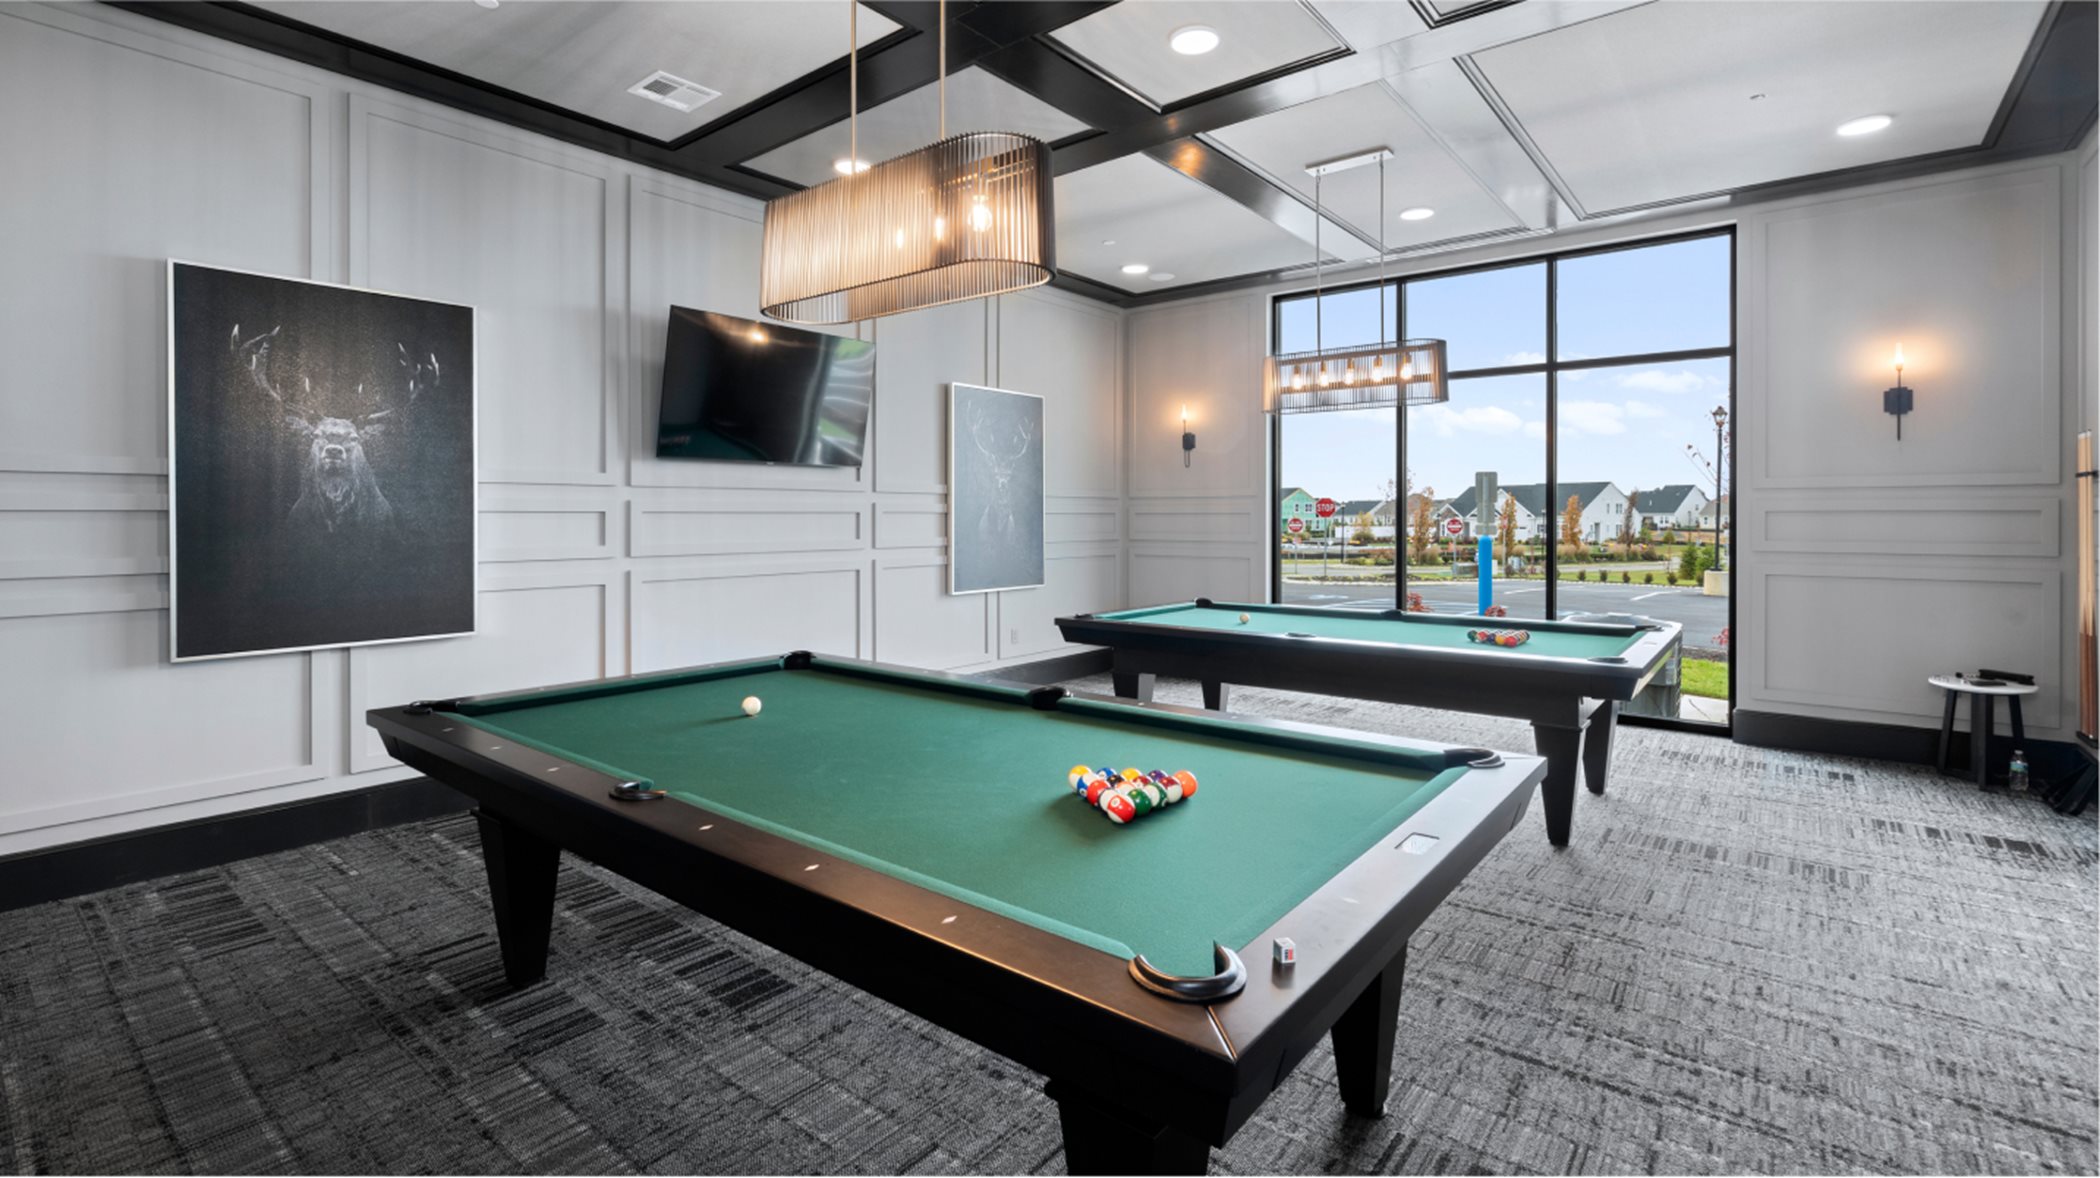 Clubhouse billiards room